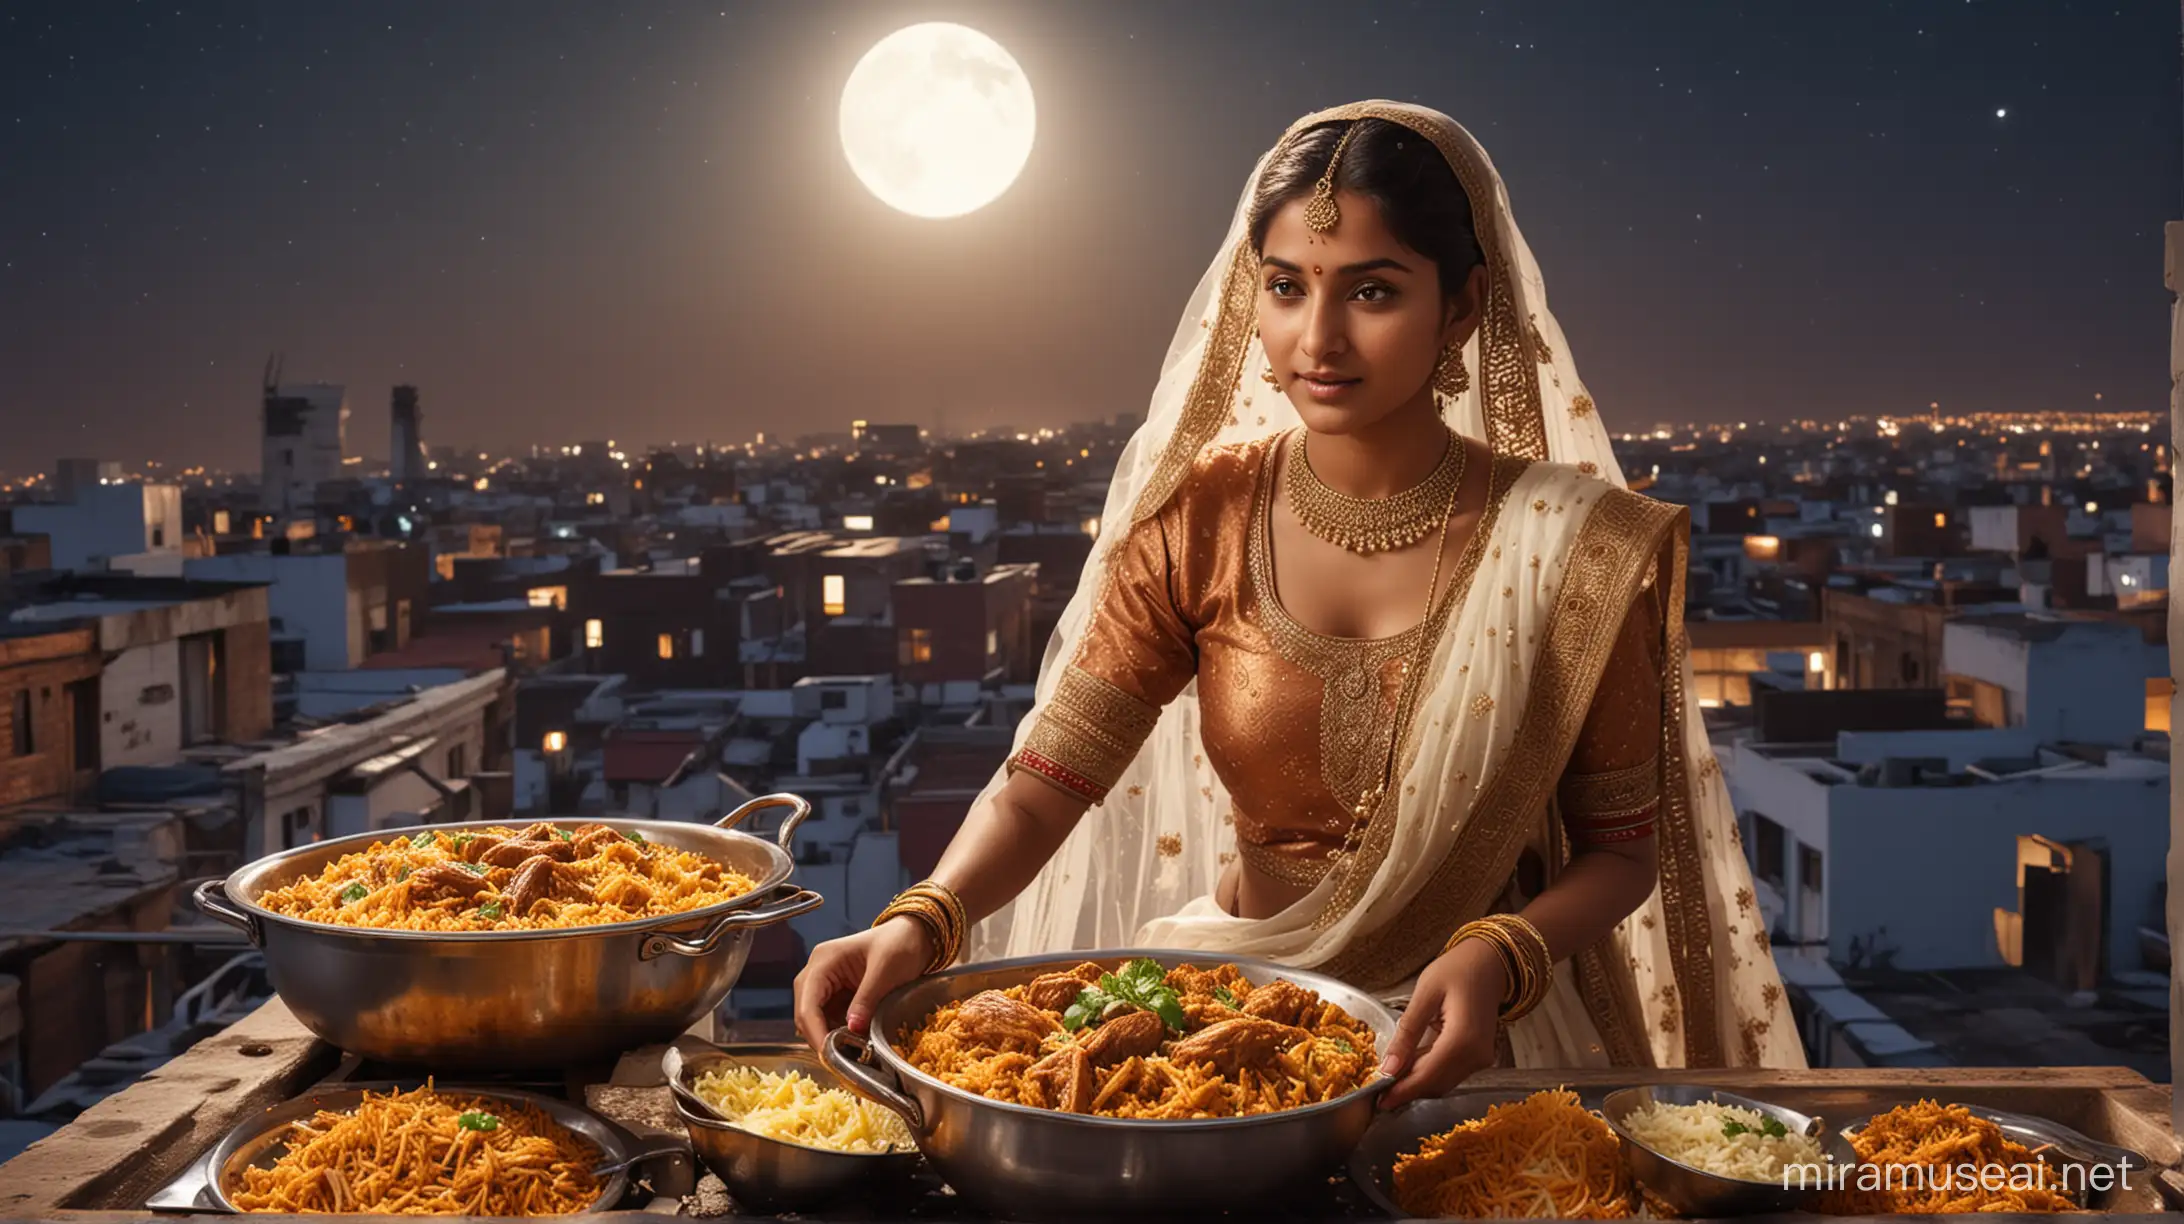 Generate a hyper-detailed image of an Indian girl, dressed as a bride, cooking biryani on a rooftop. Show the moon in the night sky, casting a soft glow over the scene, highlighting the intricate details of the cooking process and the surrounding environment